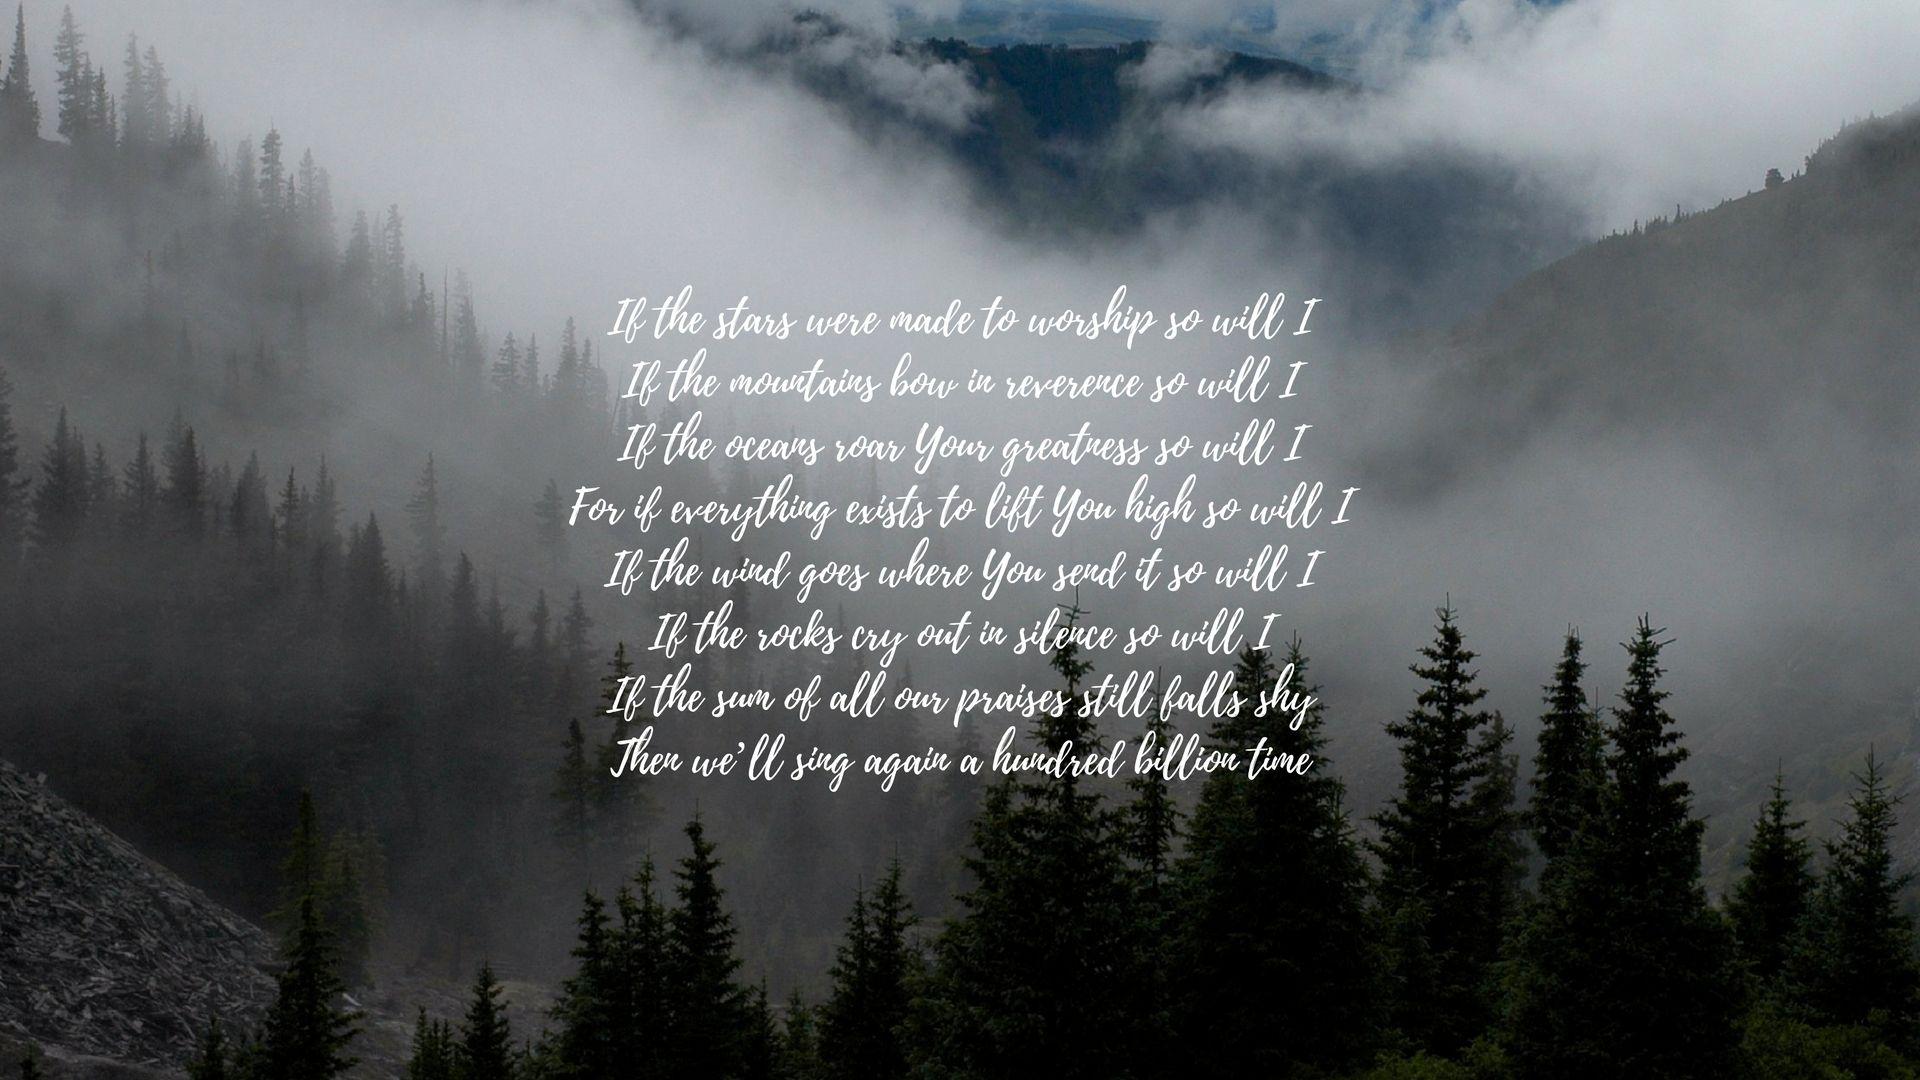 So Will I By Hillsong United Desktop Wallpaper. {words}. Bible